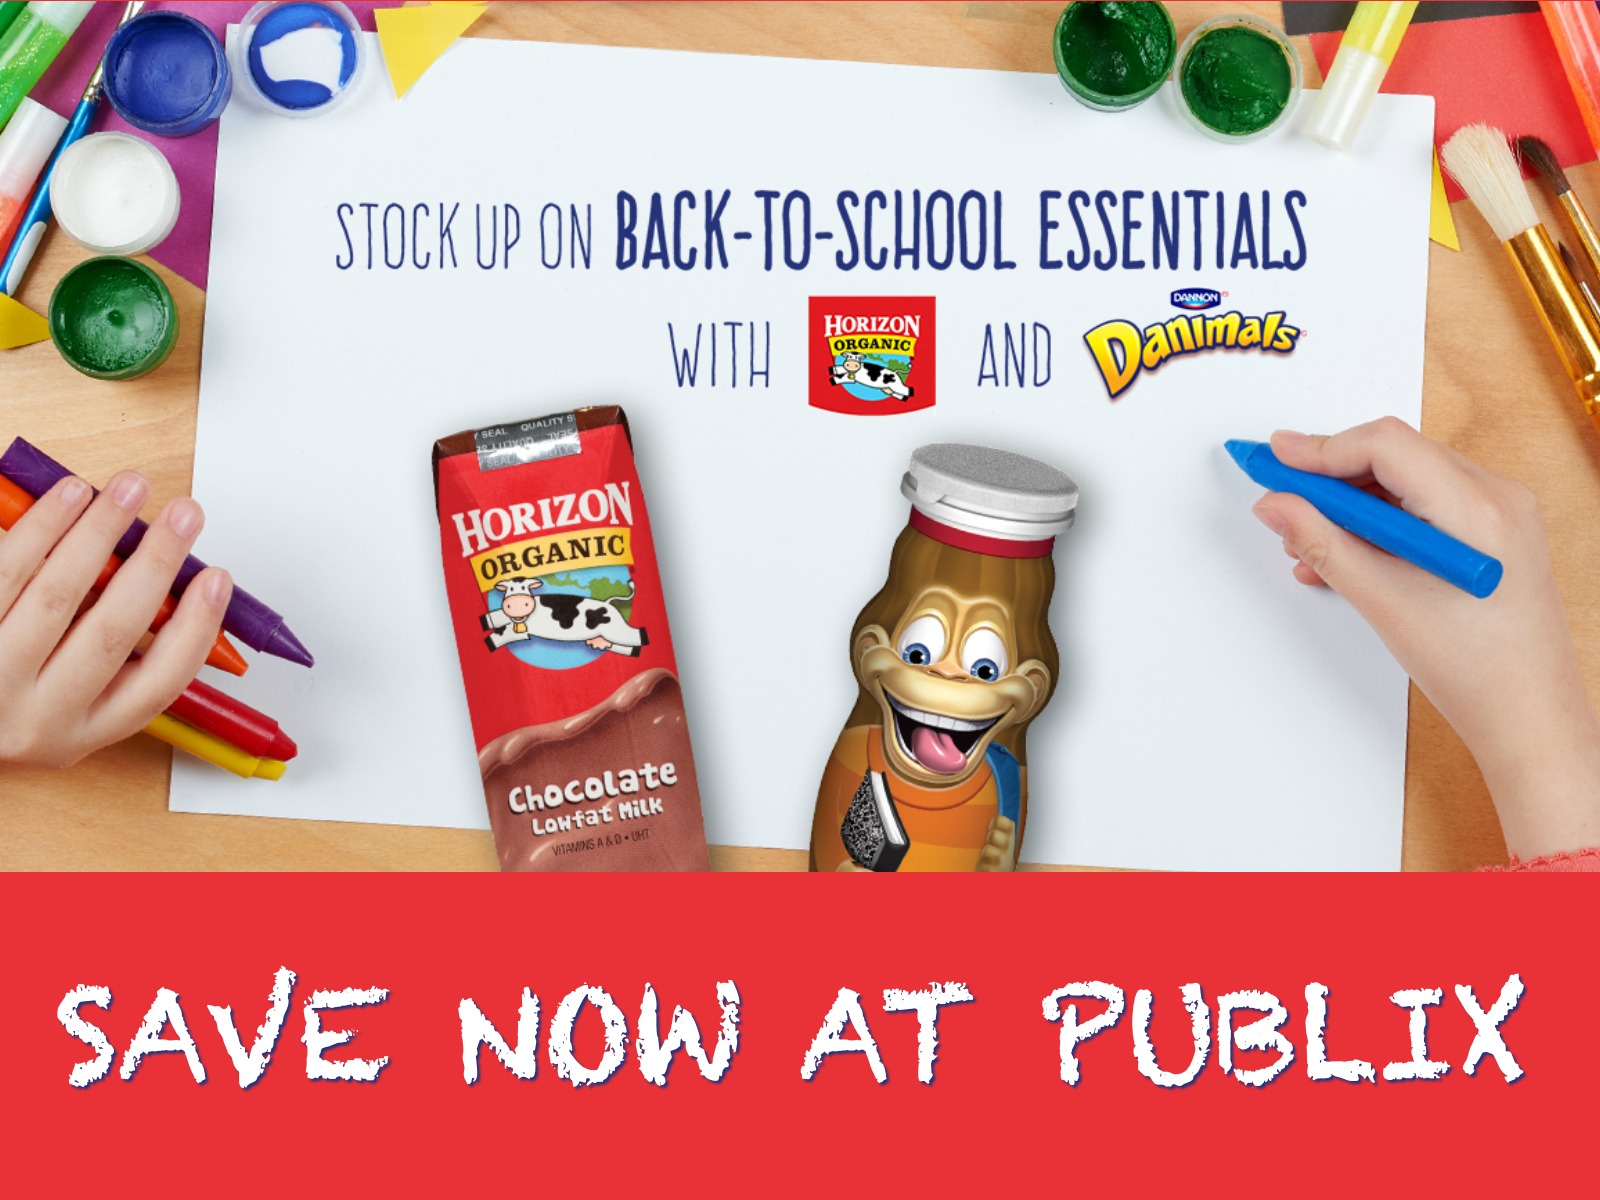 Stock Up On Back-To-School Essential & Save On Horizon Organic® Milk and Dannon® Danimals® At Publix on I Heart Publix